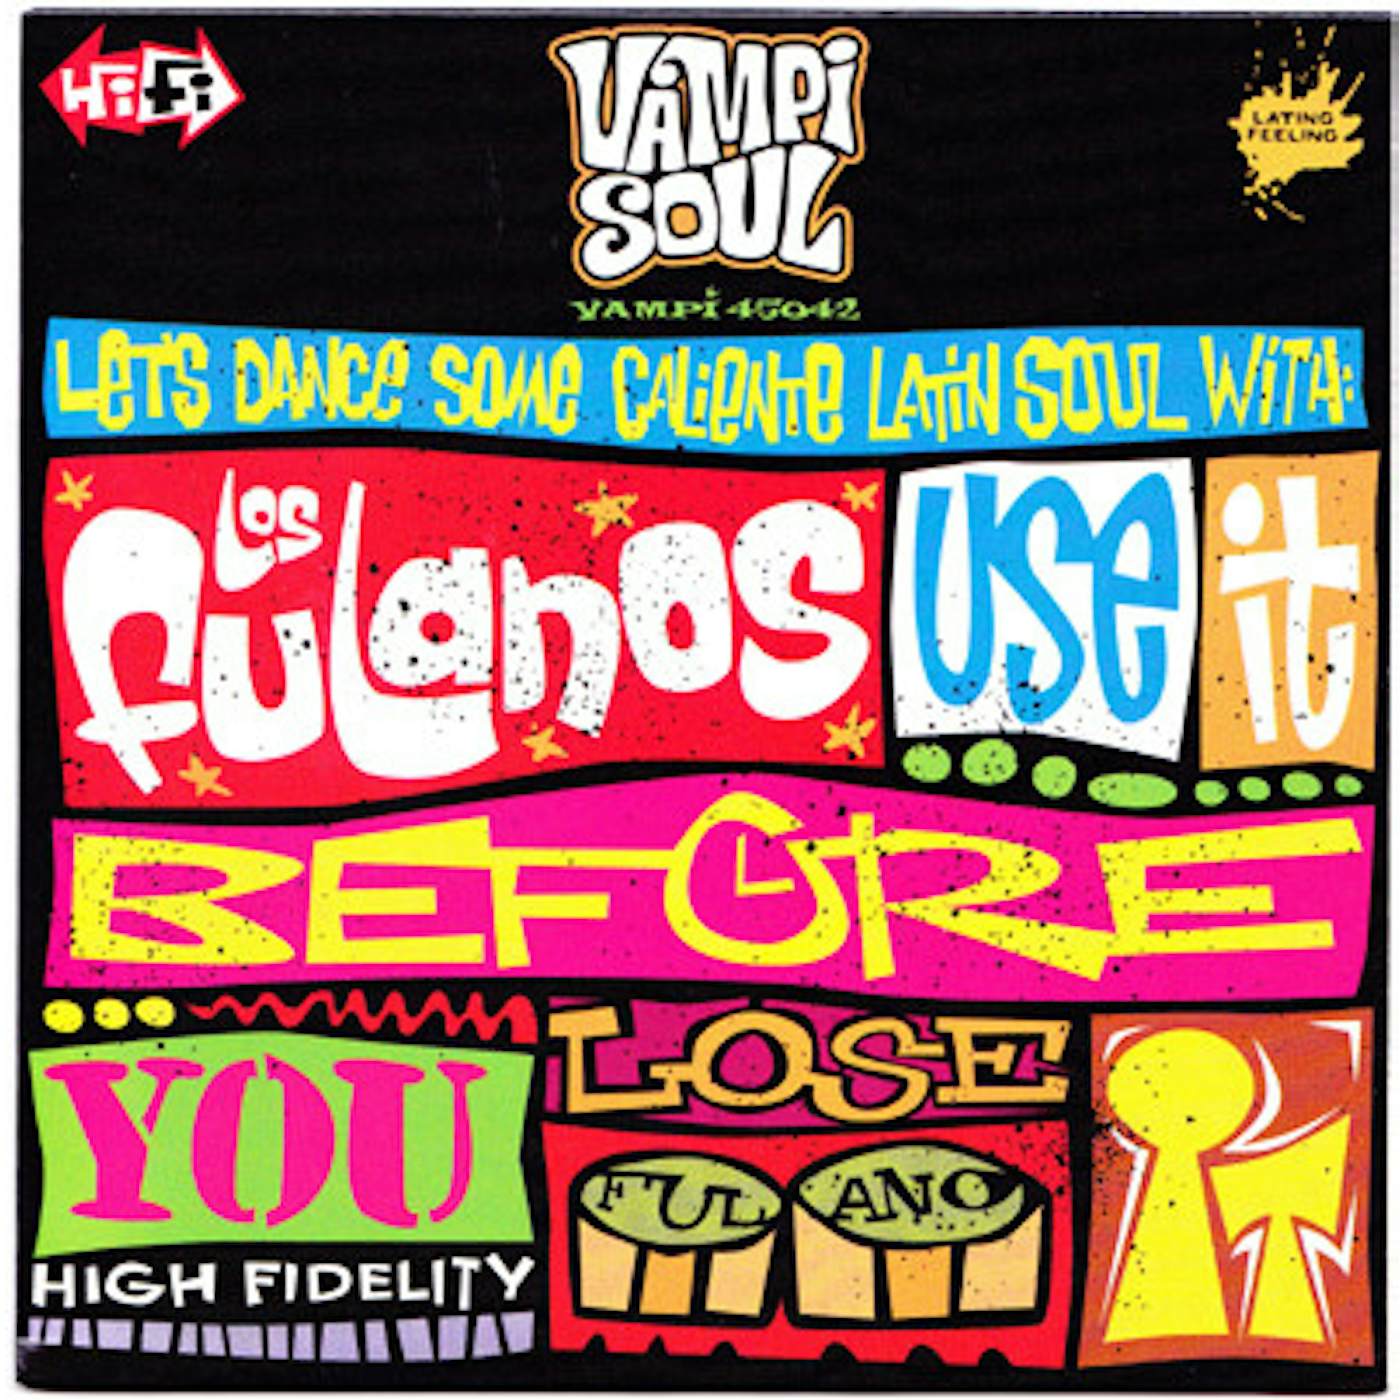 Los Fulanos USE IT BEFORE YOU LOSE IT Vinyl Record